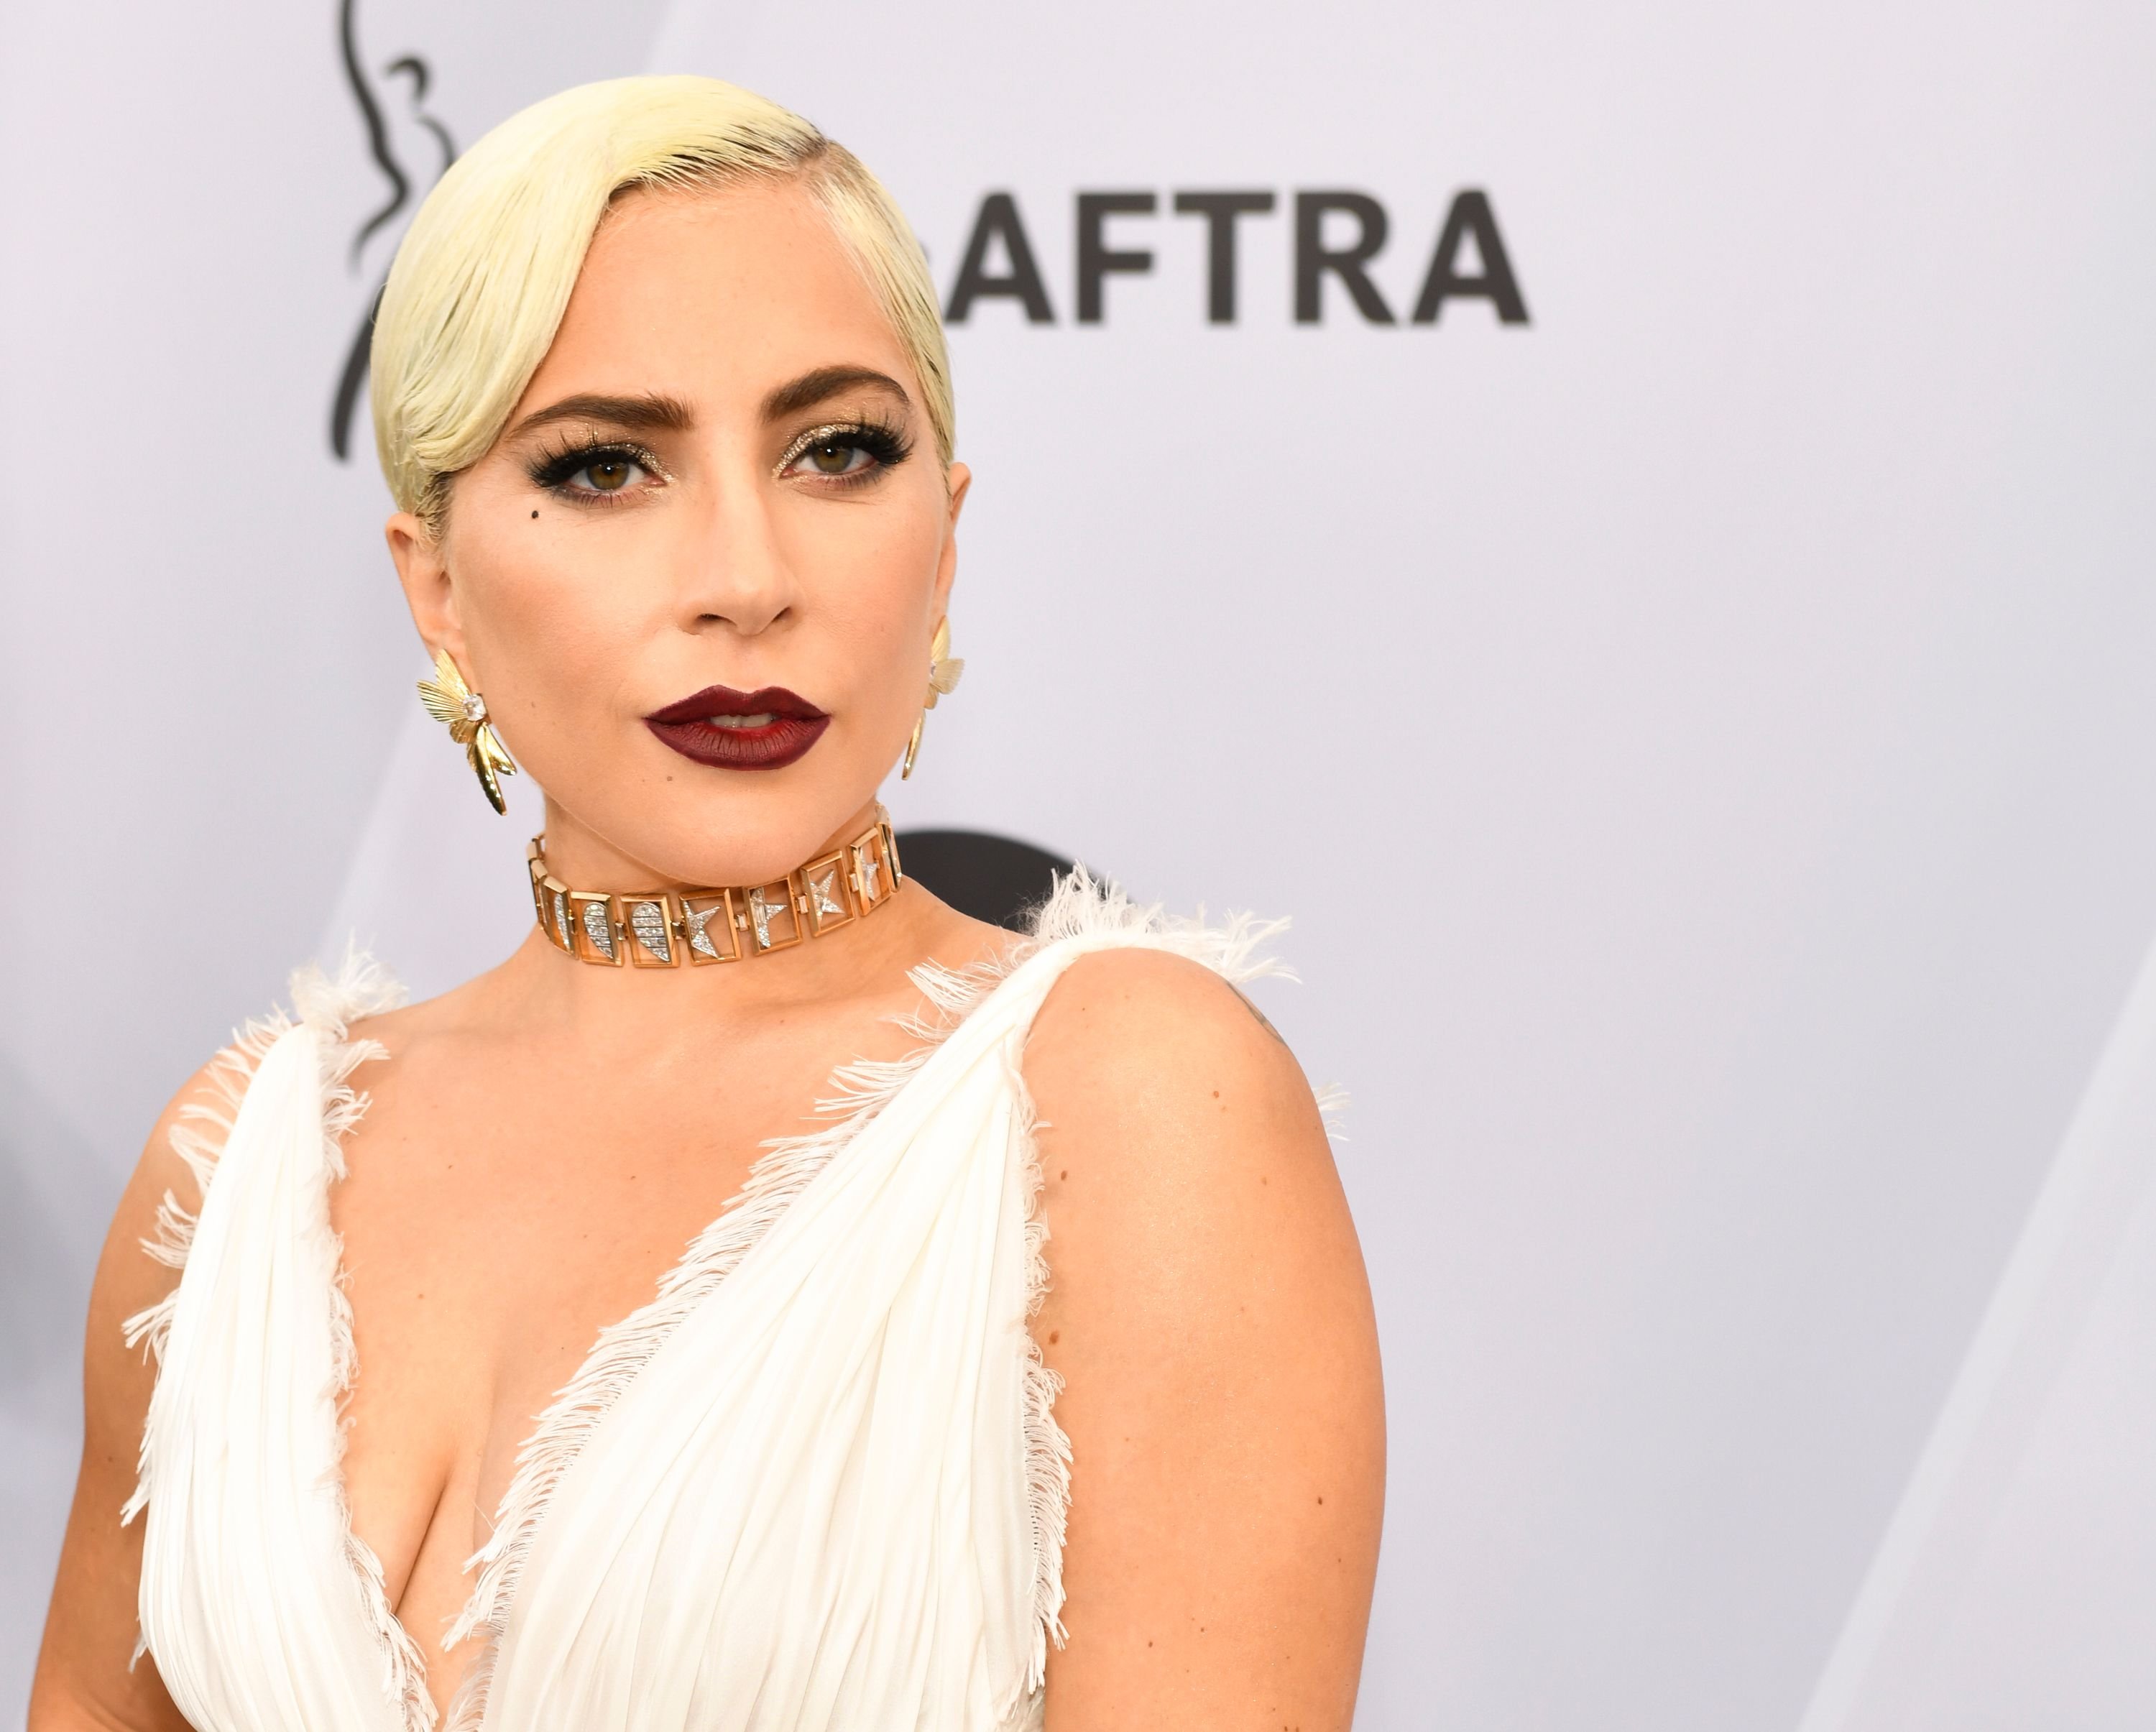 Lady Gaga at the 25th Annual Screen Actors Guild Awards at The Shrine Auditorium on January 27, 2019 in Los Angeles, California. | Photo: Getty Images